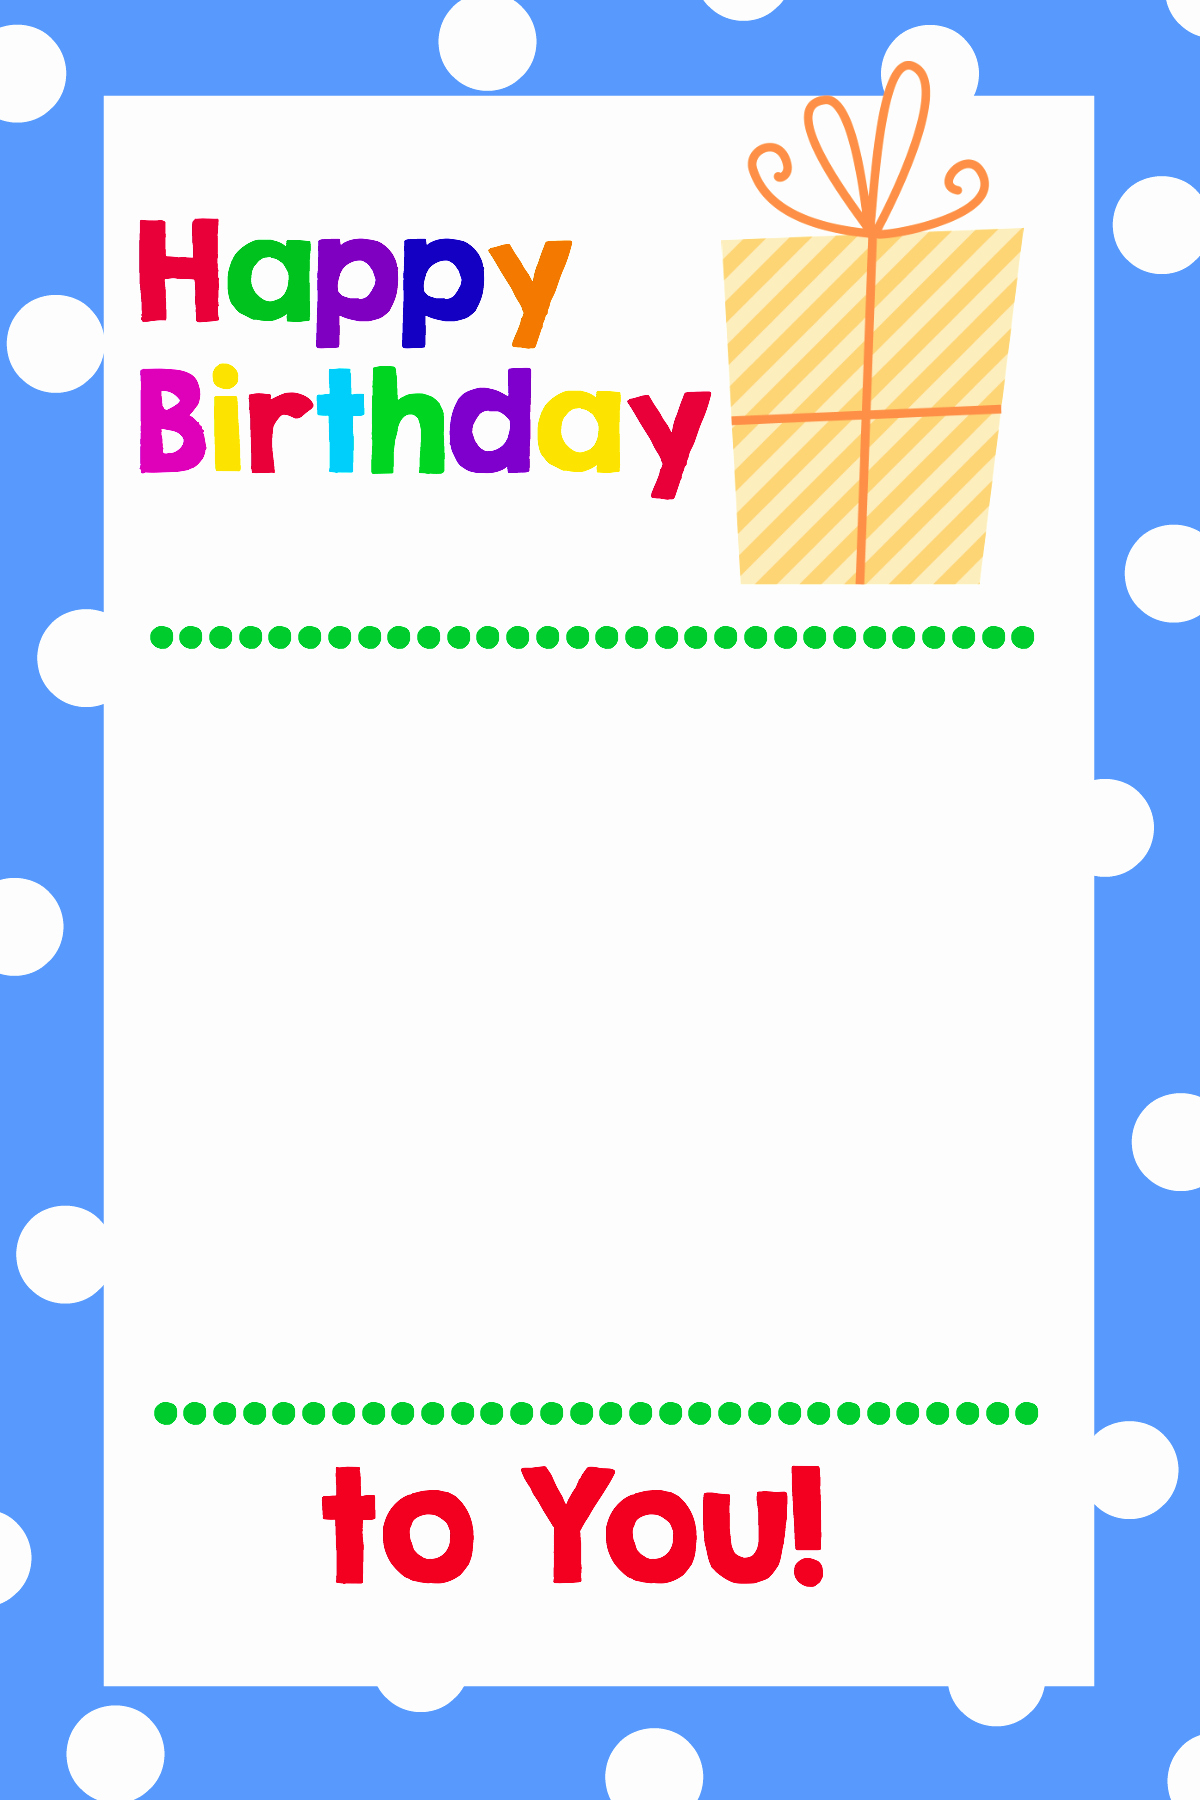 Free Printable Gift Card Template Luxury Printable Birthday Gift Card Holders Crazy Little Projects